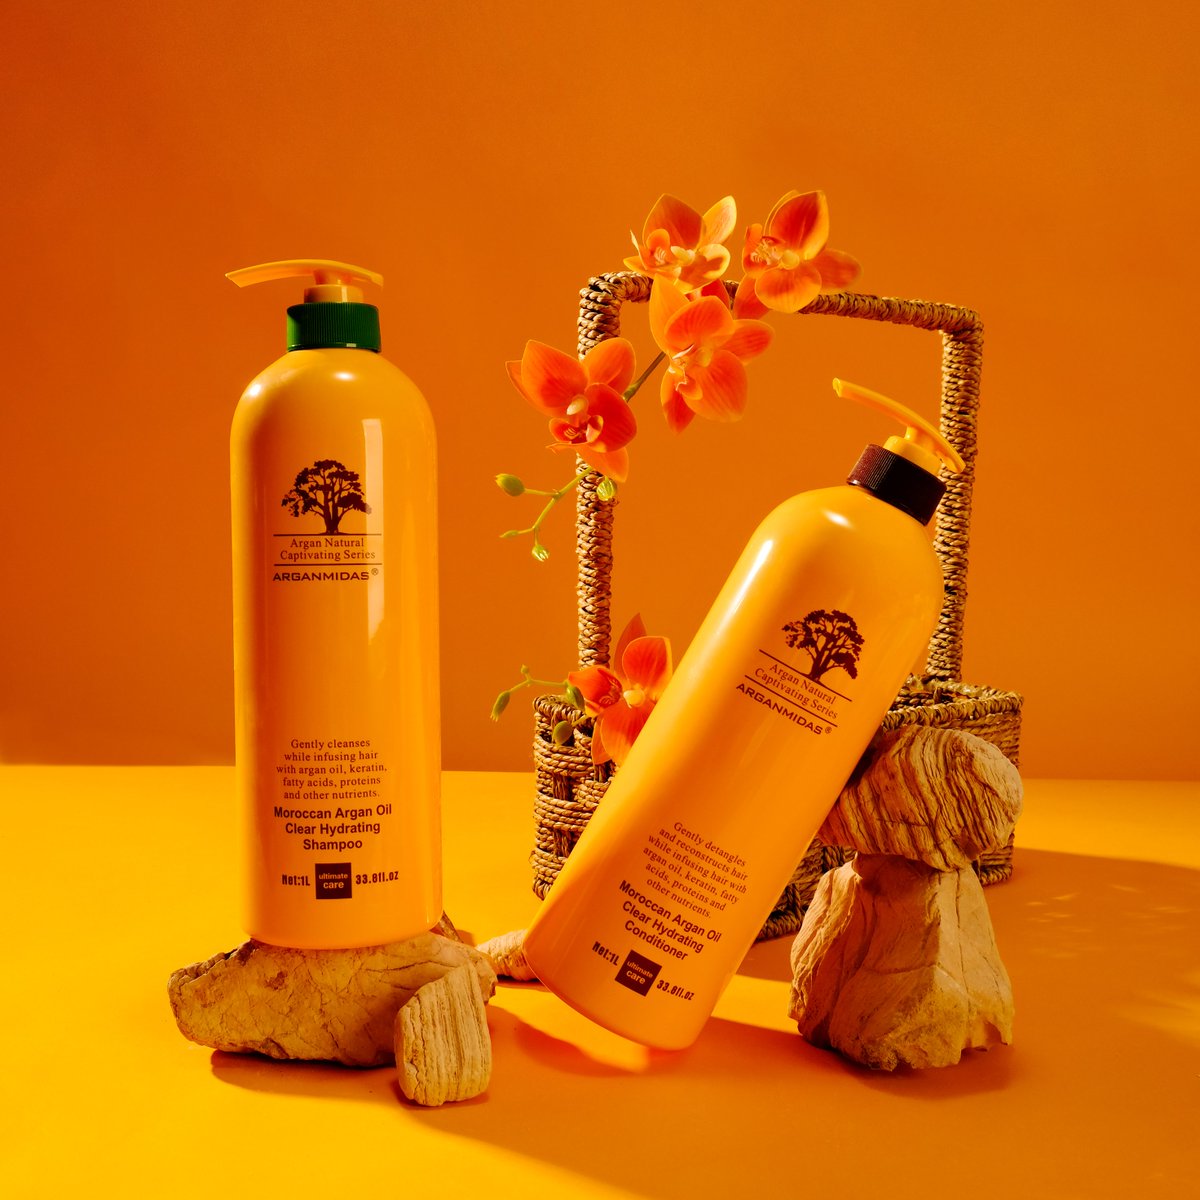 Love Hydrating Shampoo & Conditioner? 🧡 Good news—they’re now available in a limited-edition One-Liter Set. Don’t miss out!

#Arganmidas #shampoo #conditioner #hydrating #haircare #arganoil #healthyhair #healthyhairhealthylife